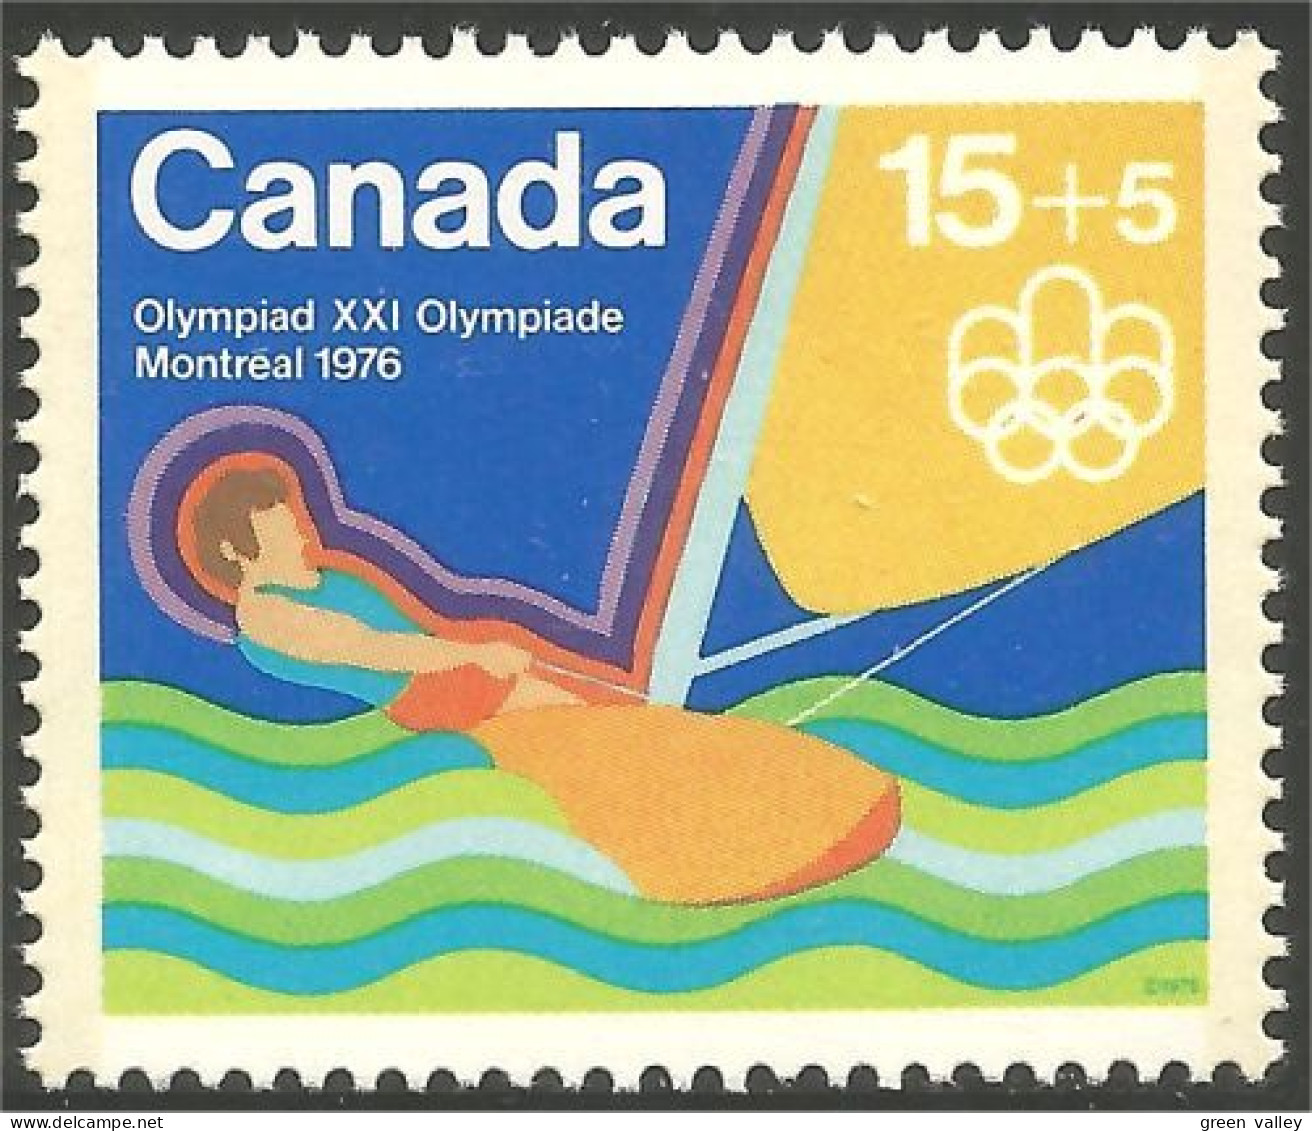 Canada 15c+5c Voile Sailing Jeux Olympiques Montreal 1976 Olympic Games MNH ** Neuf SC (CB-06c) - Estate 1976: Montreal